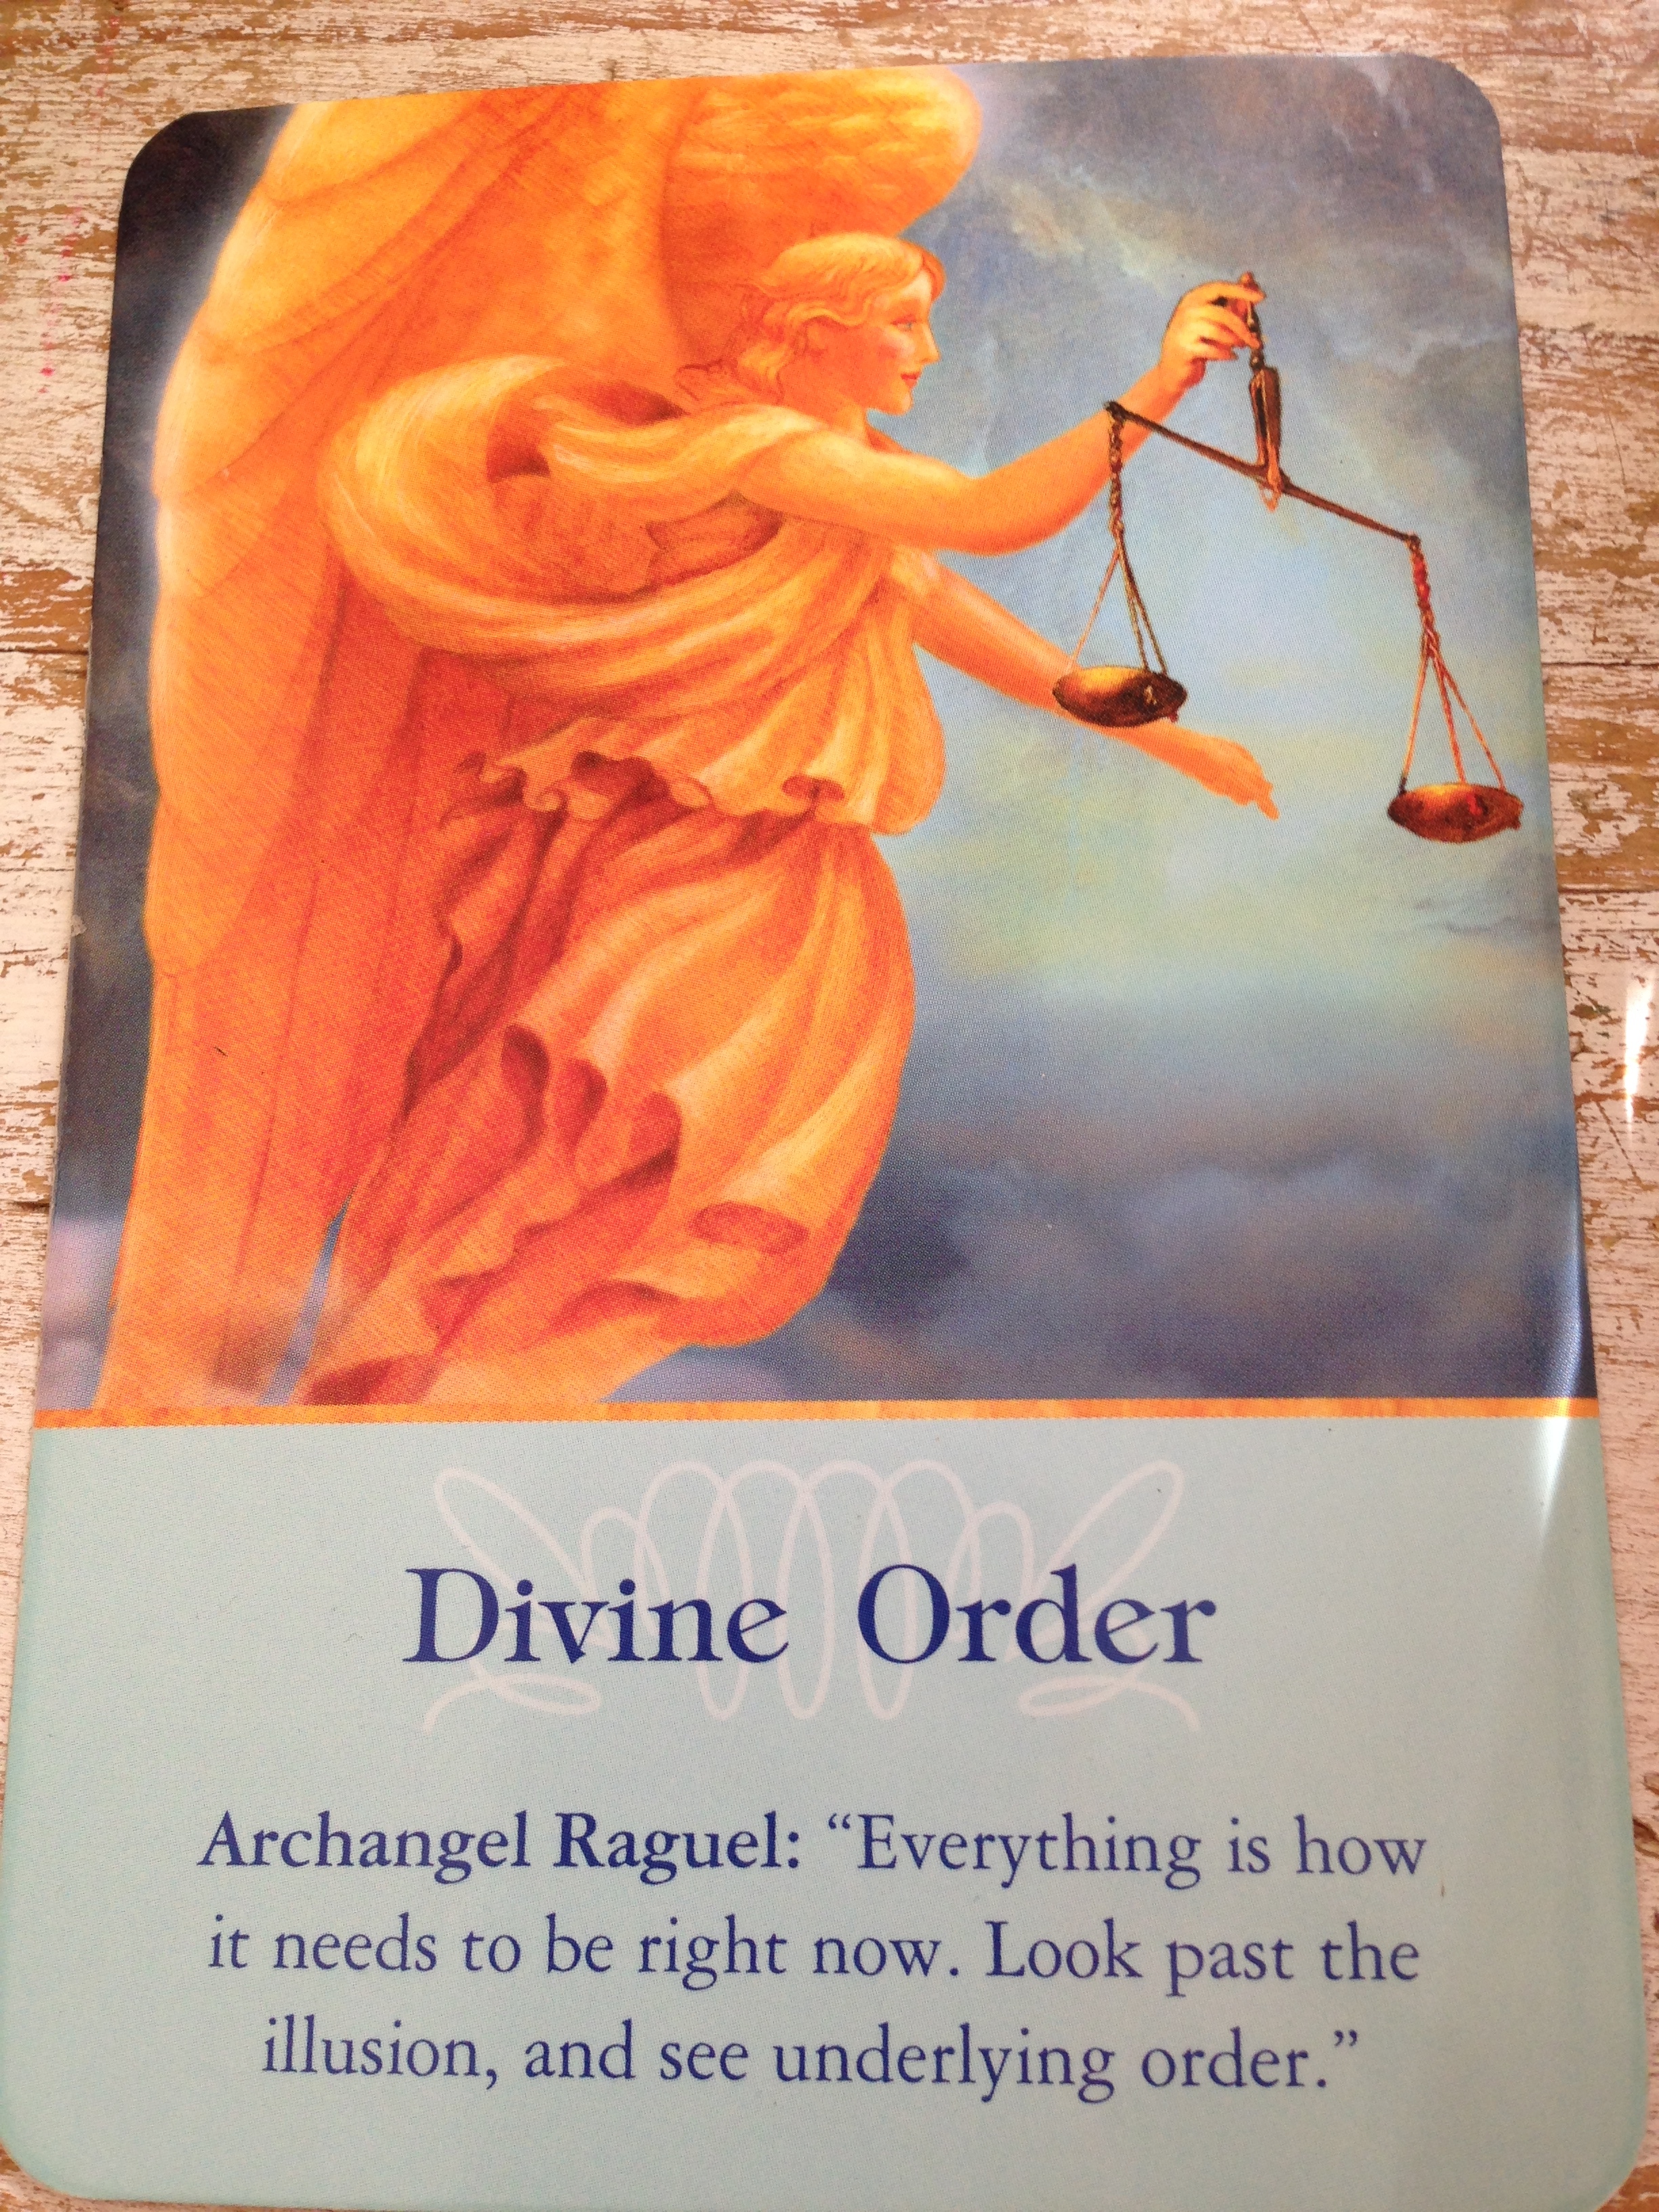 Archangel Oracle Cards by Doreen Virtue.